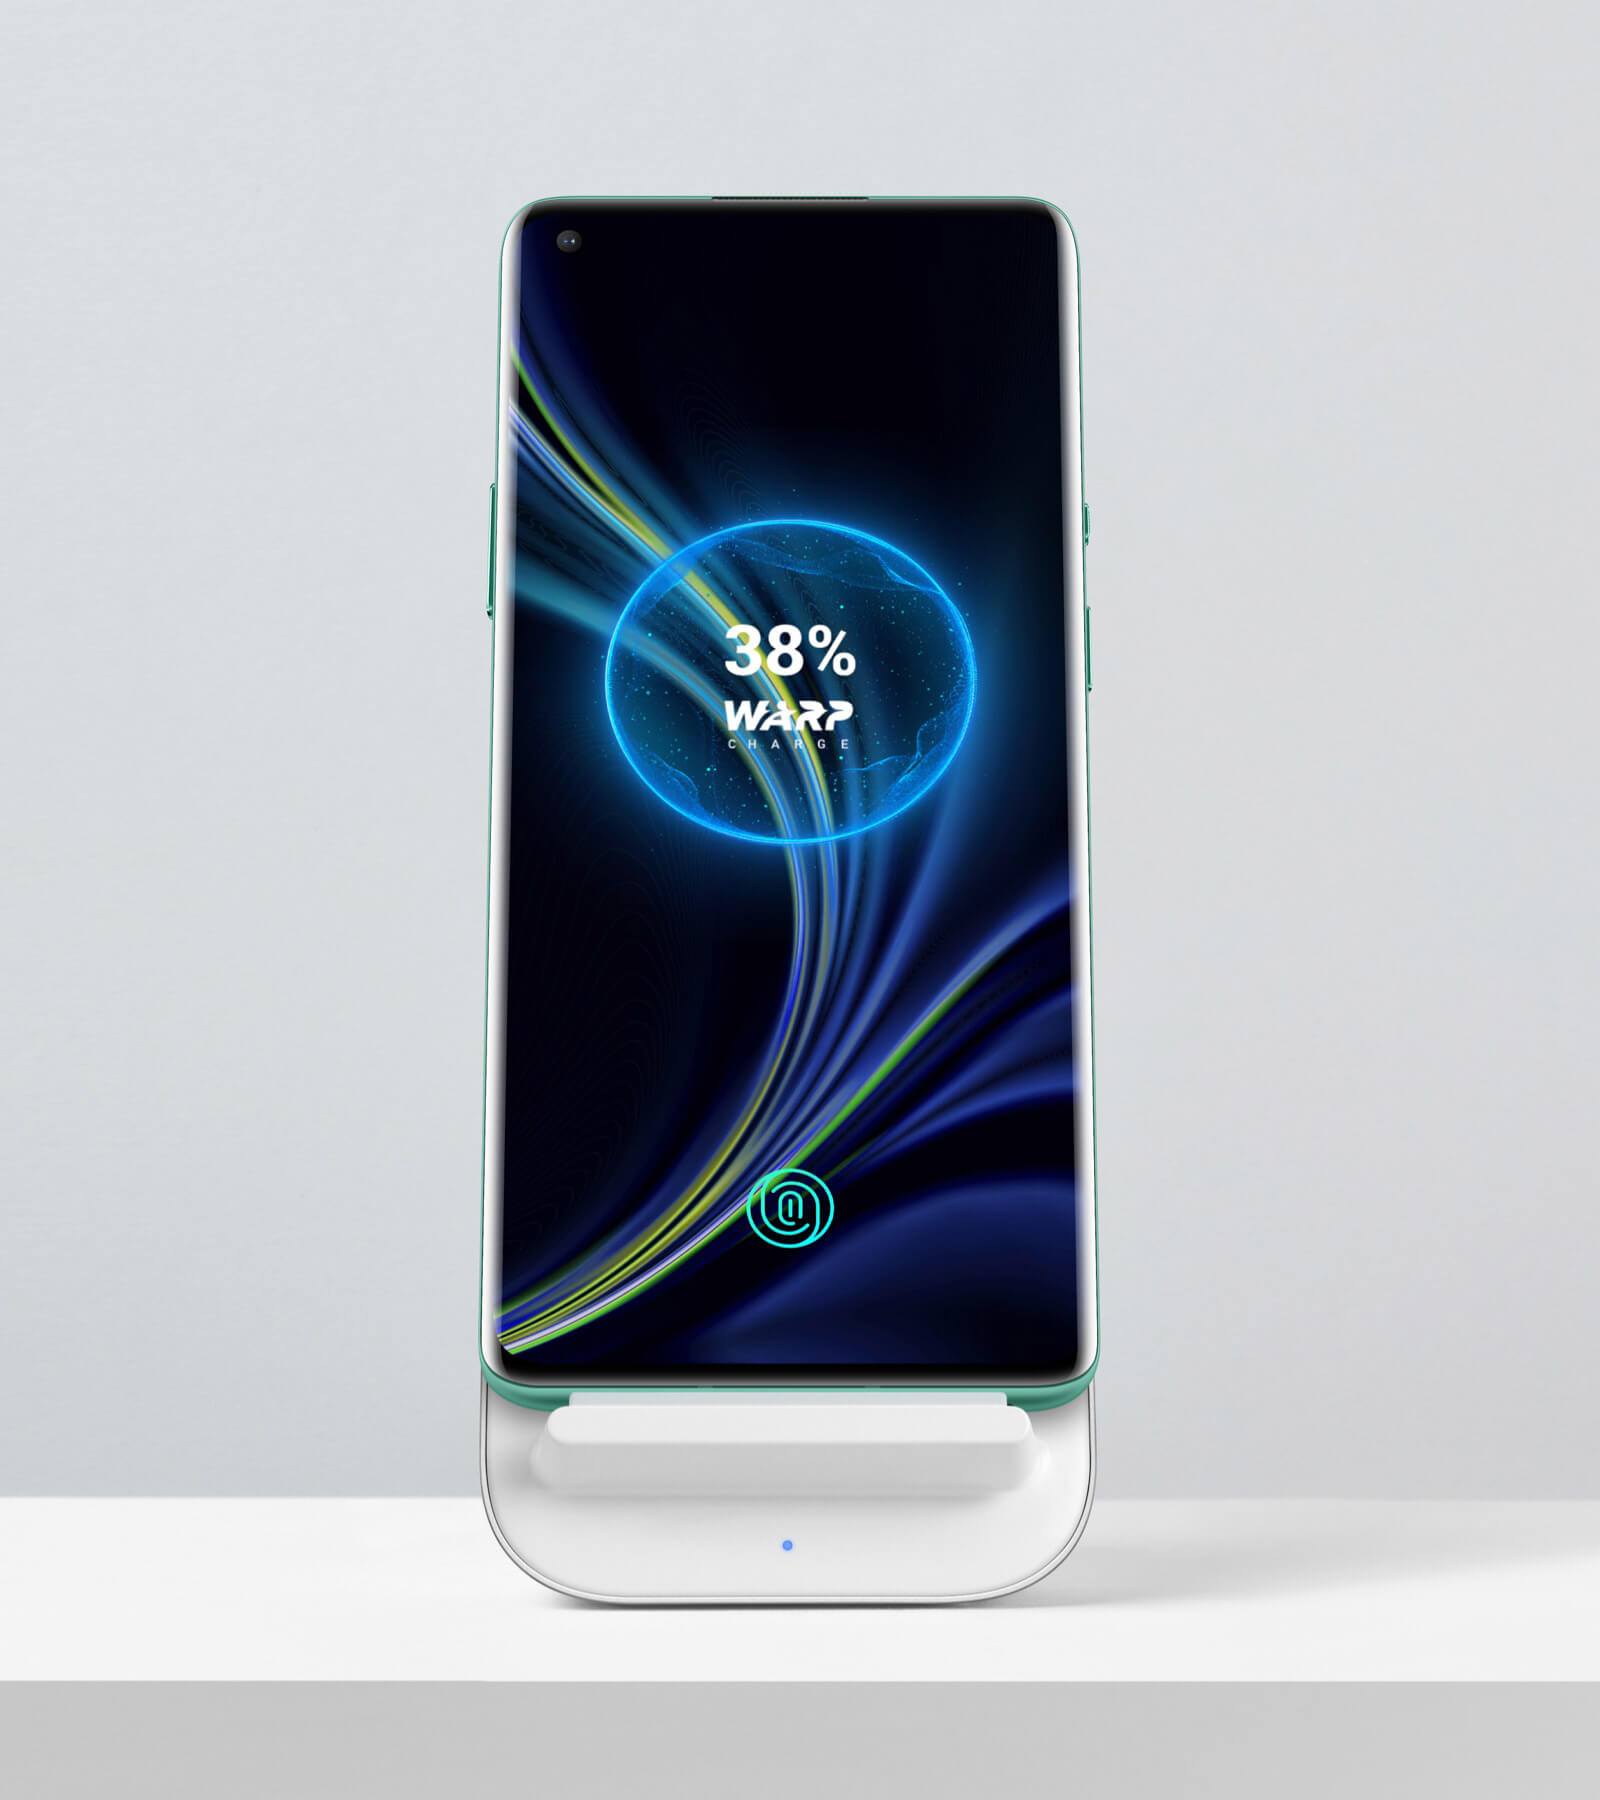 OnePlus 8 Pro using the fastest wireless charger ever